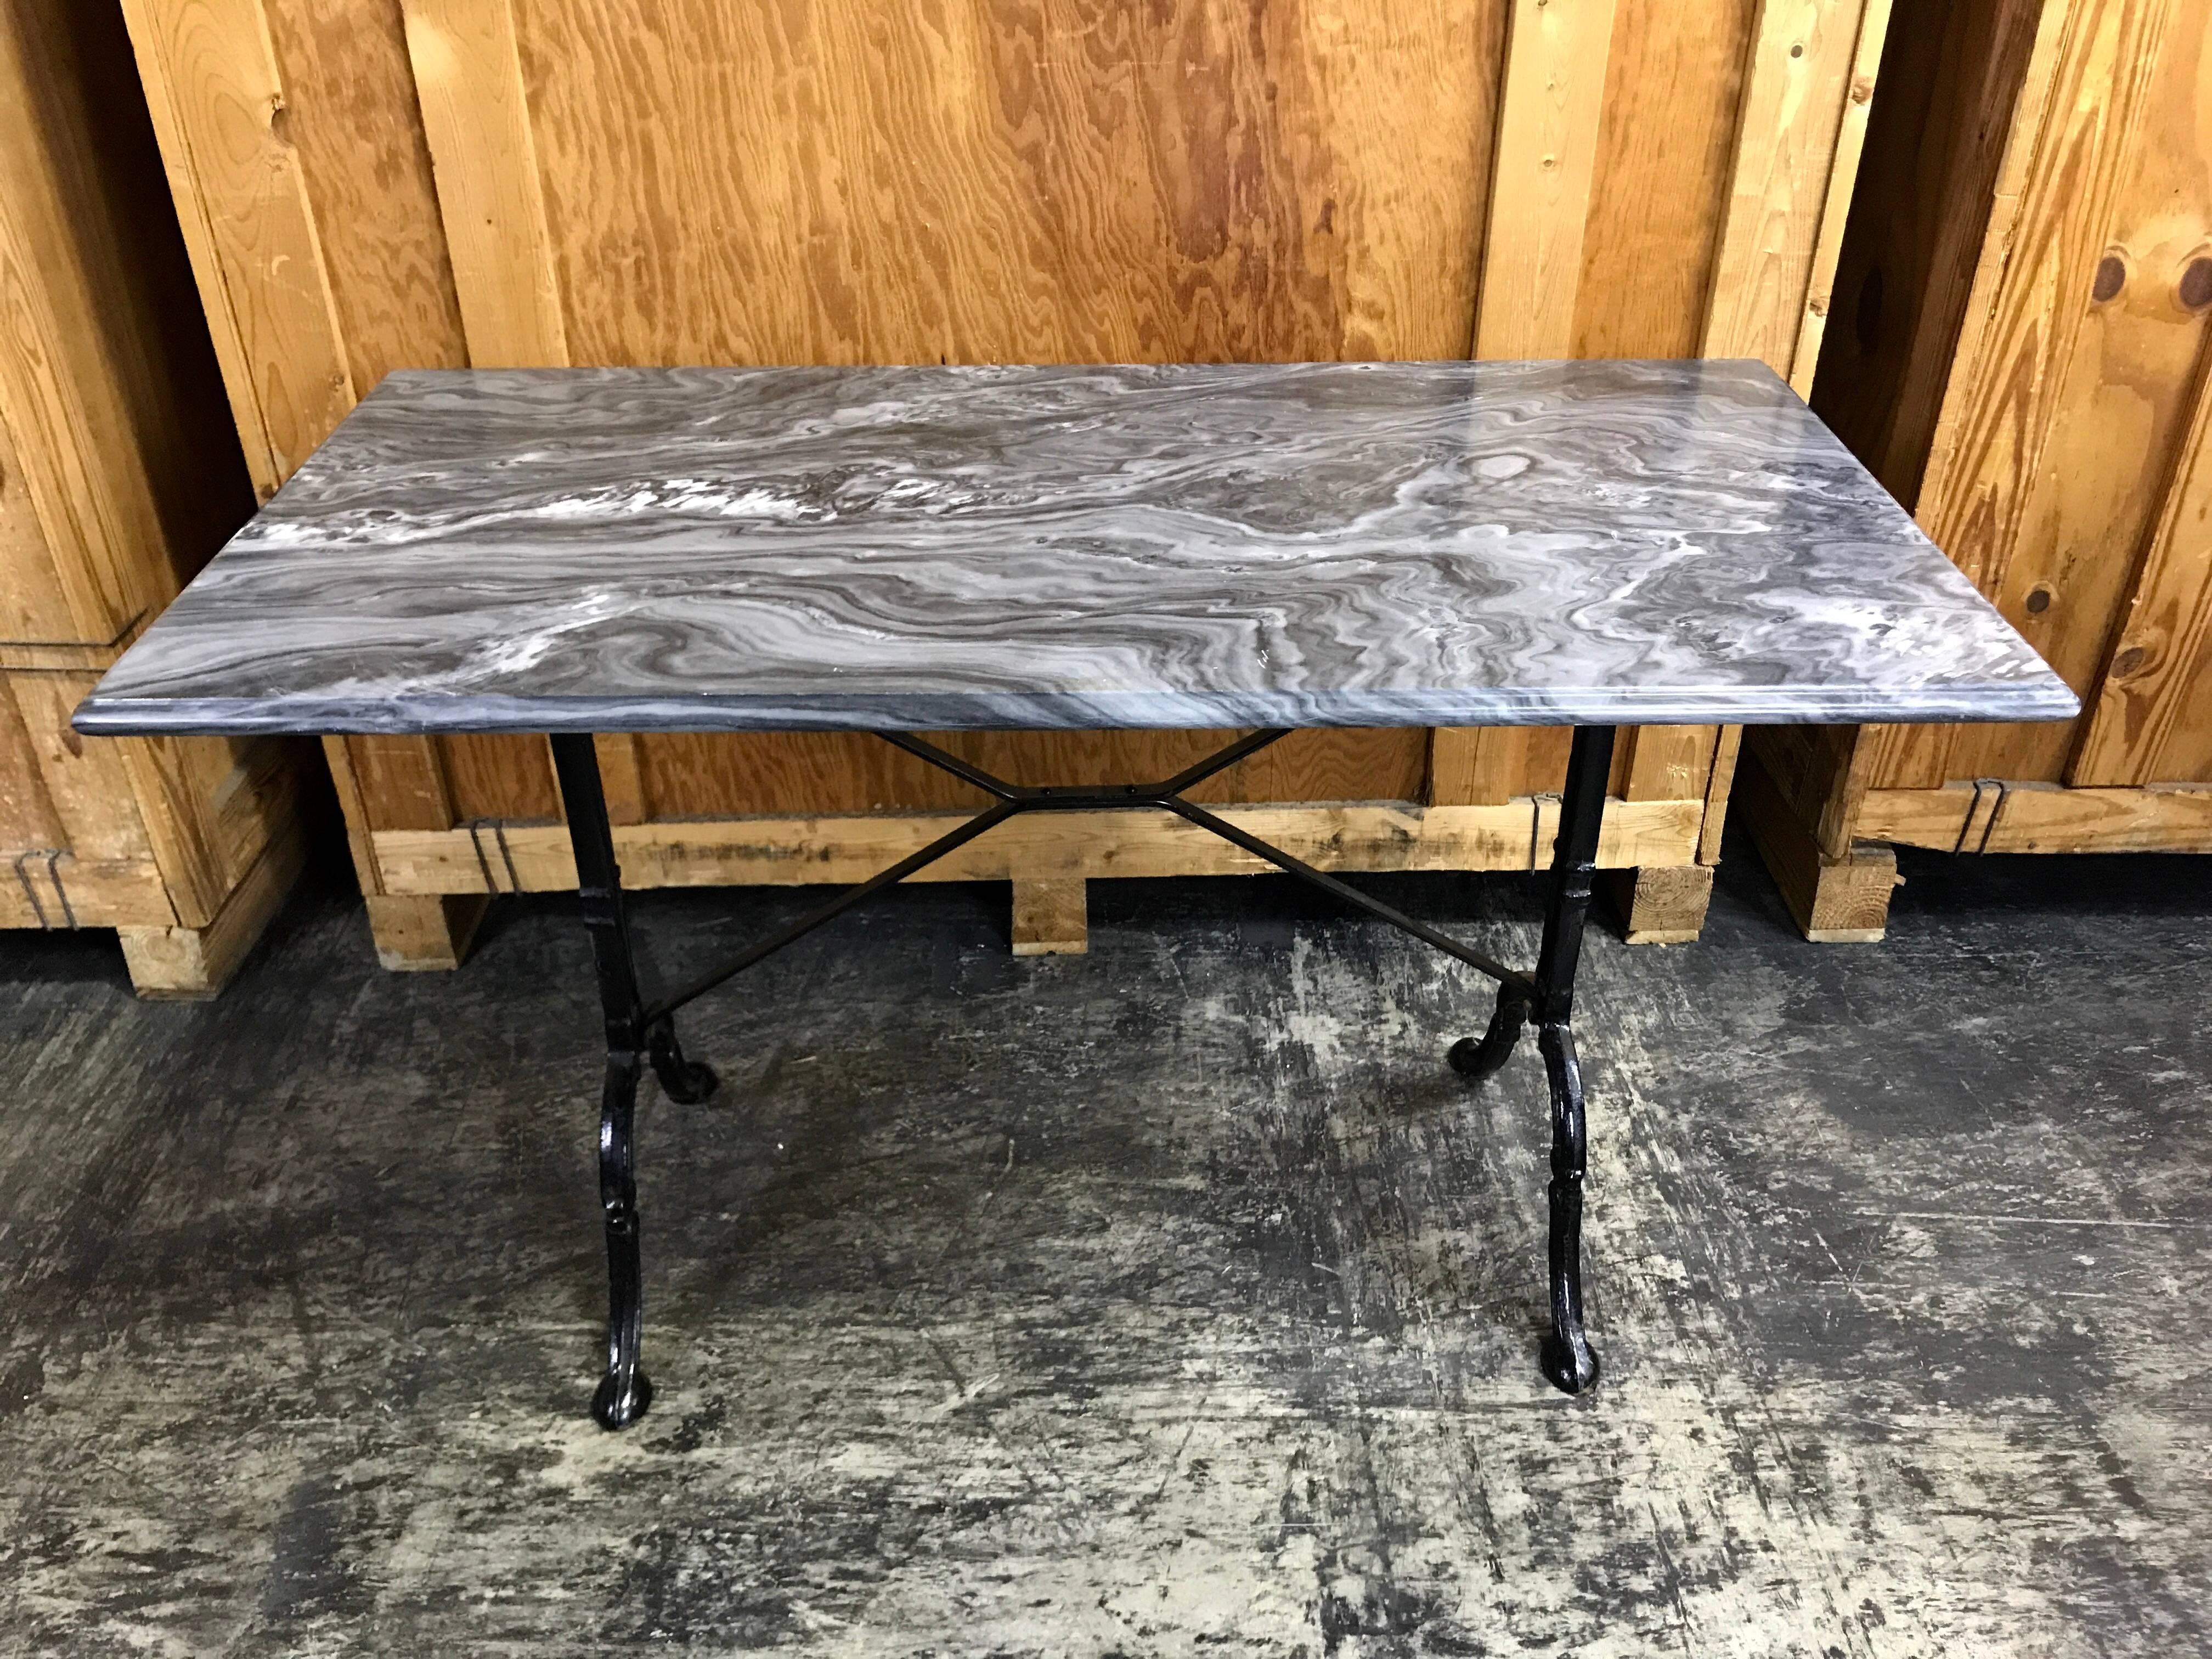 Antique French marble top bakers/bistro table, of rectangular form with beveled variegated marble with deep hues of grey, white and black. Raised on a black iron trestle base. The width of the legs is 19 inches.